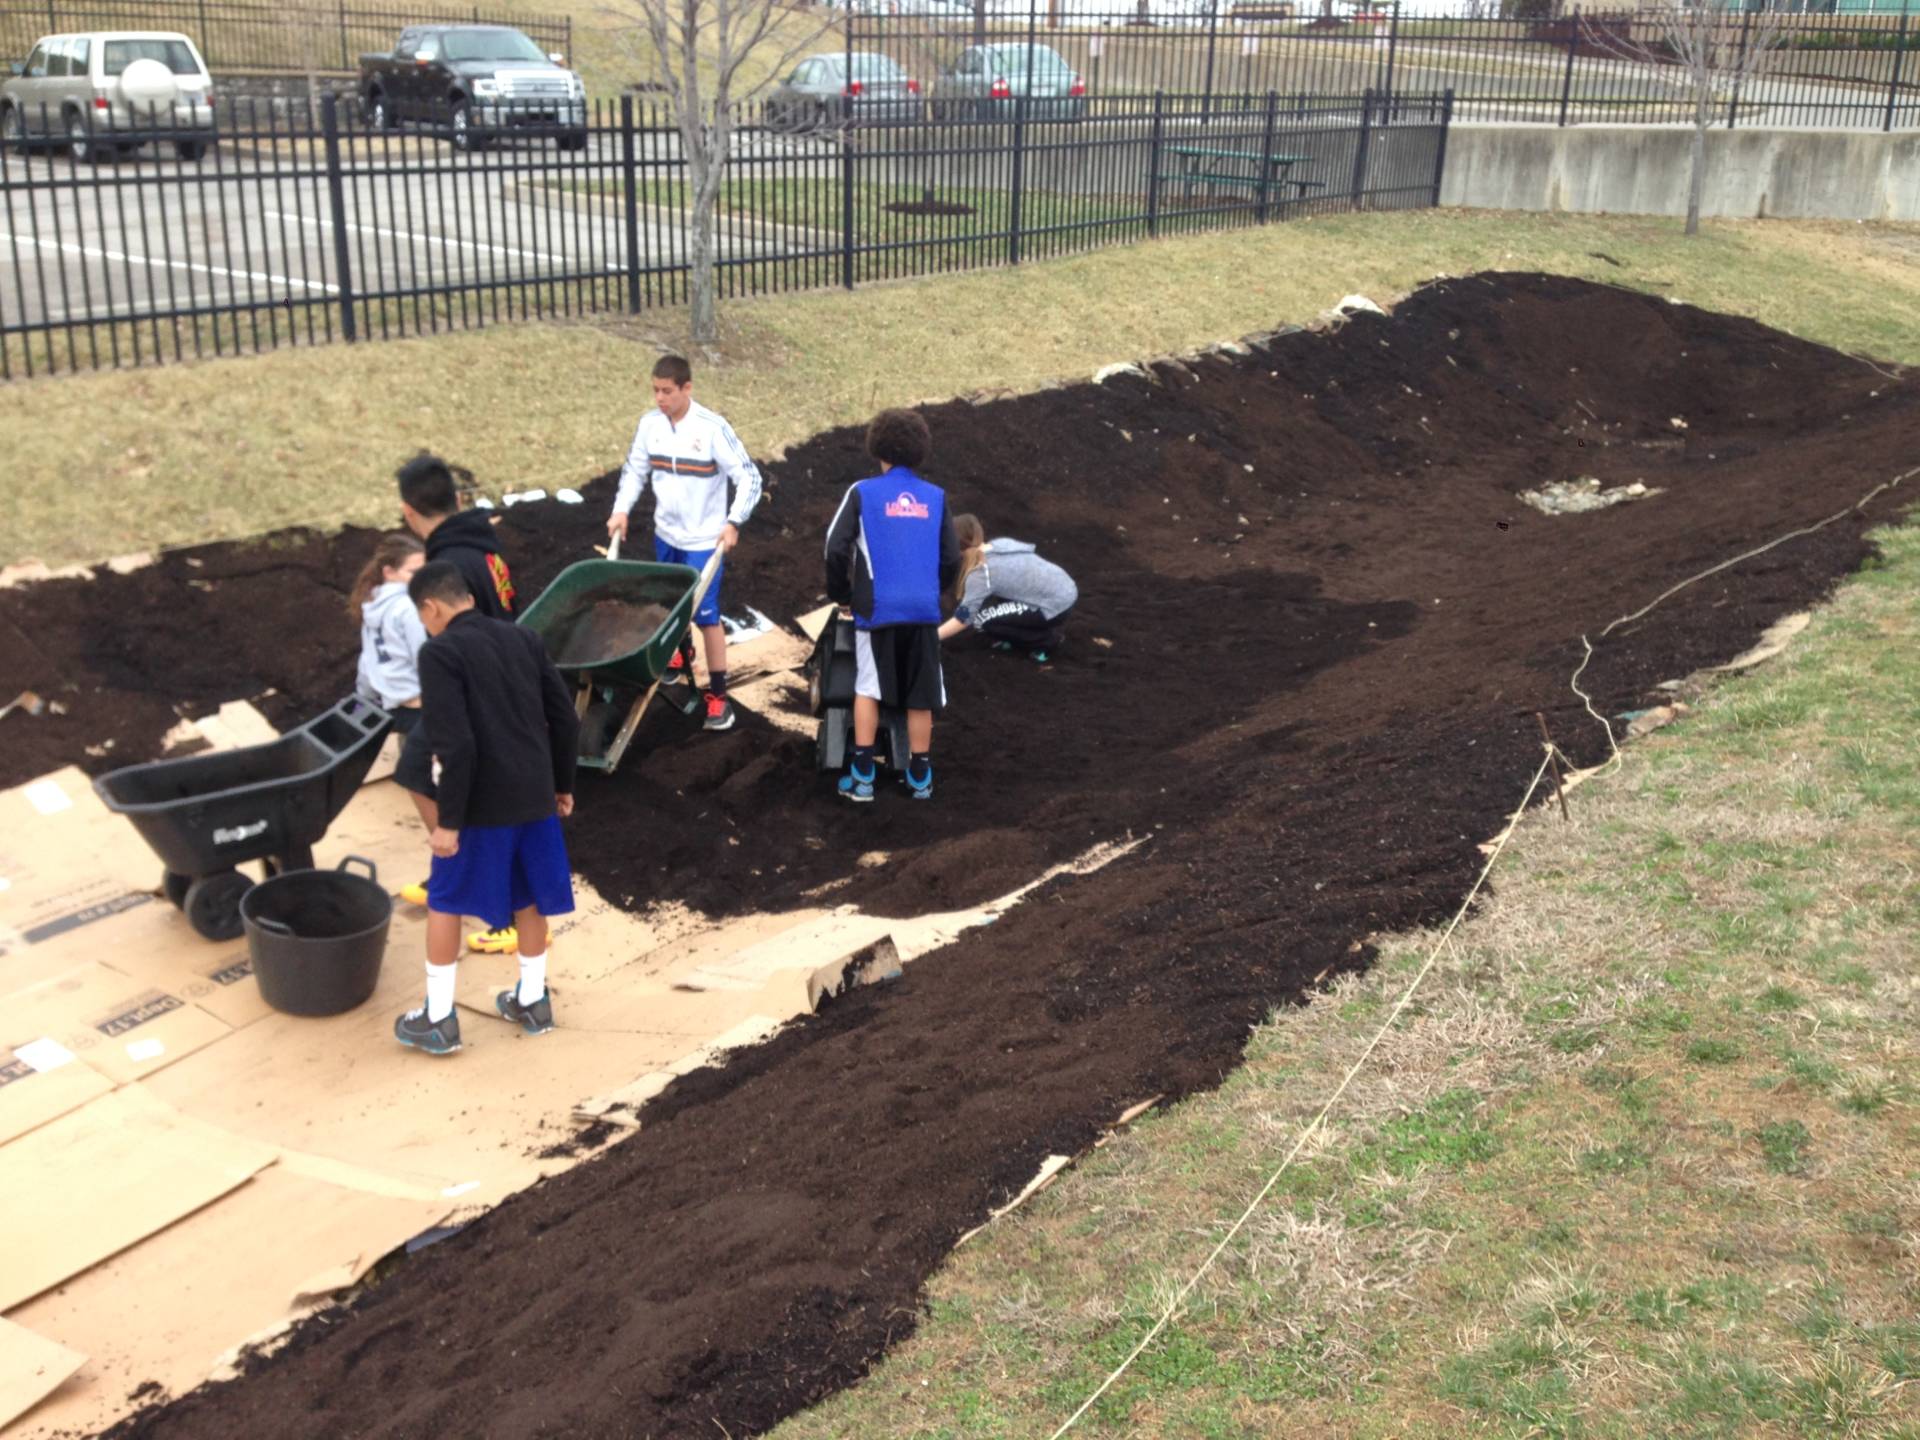 This was my sustainability class preparing the grounds for a 1200 sq ft rain garden installation. The students designed the garden, calculated the amount of soil, researched native prairie plants, prepared the seeds using a treatment called “cold stratification” to mimic Missouri winters, delivered their proposal for the superintendent/board, and then installed the garden. 100ft long and 20ft wide. In addition to the positive effects on the watershed, the rain garden also served as a pollinator garden and used in longitudinal data collection on pollinators in our campus gardens. 